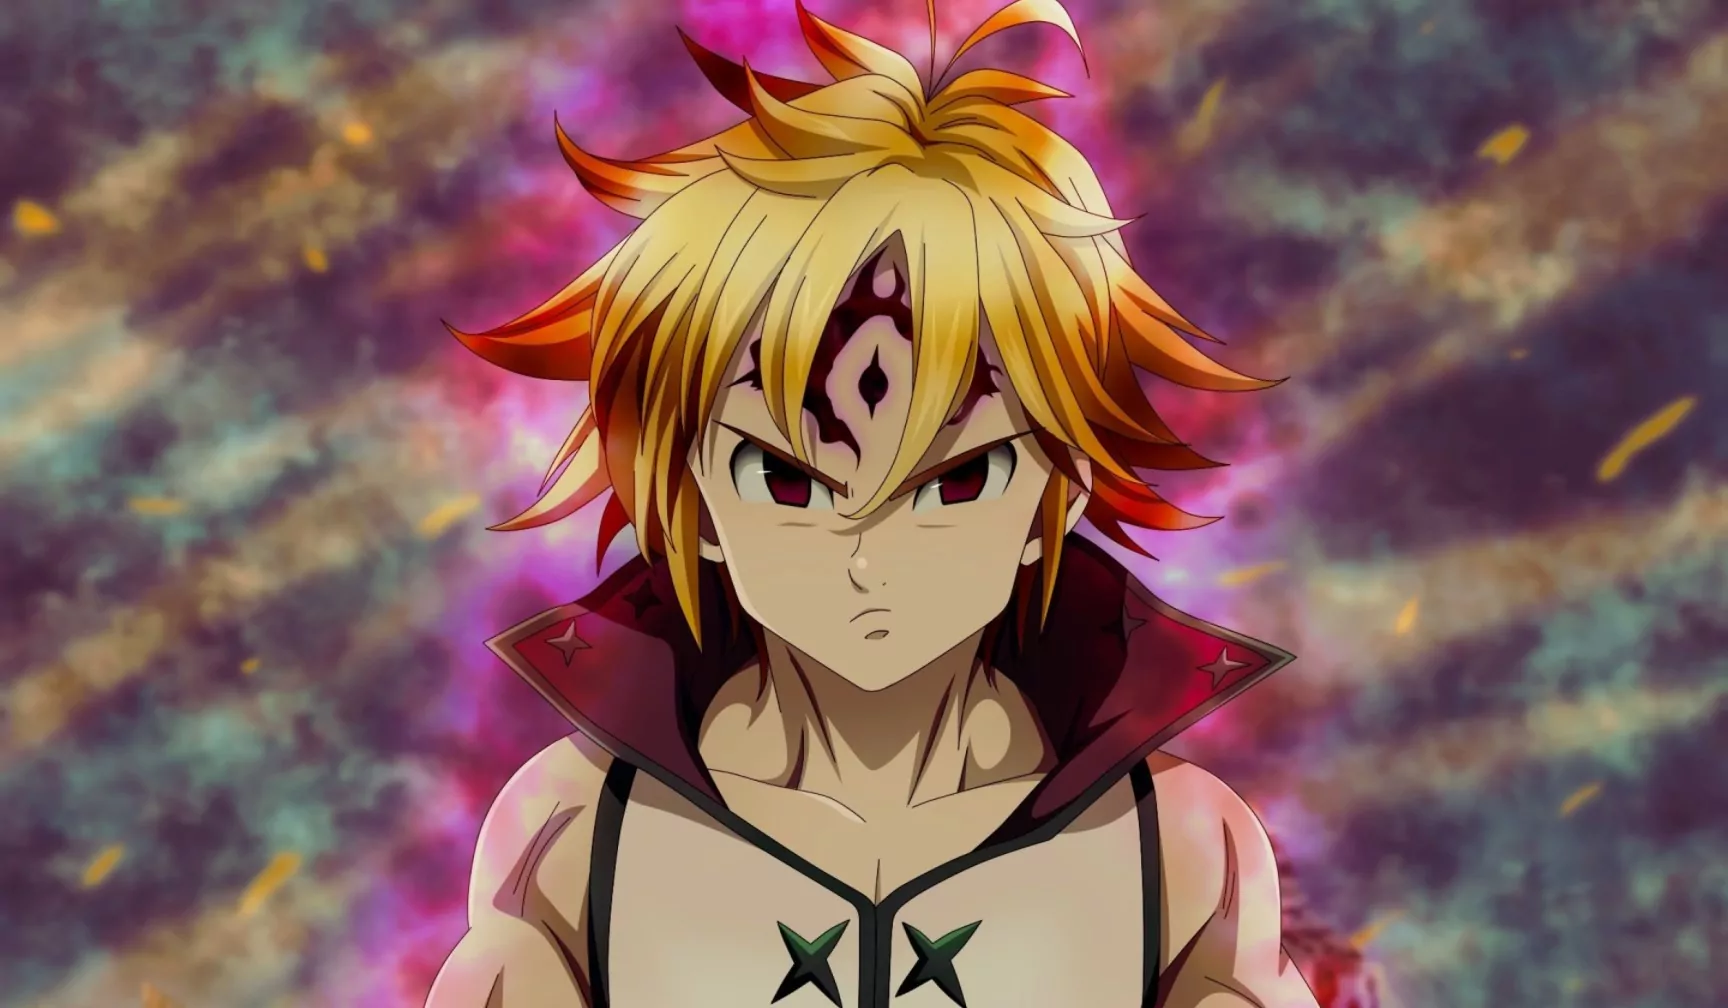 Seven Deadly Sins- Anime with Op Mc!